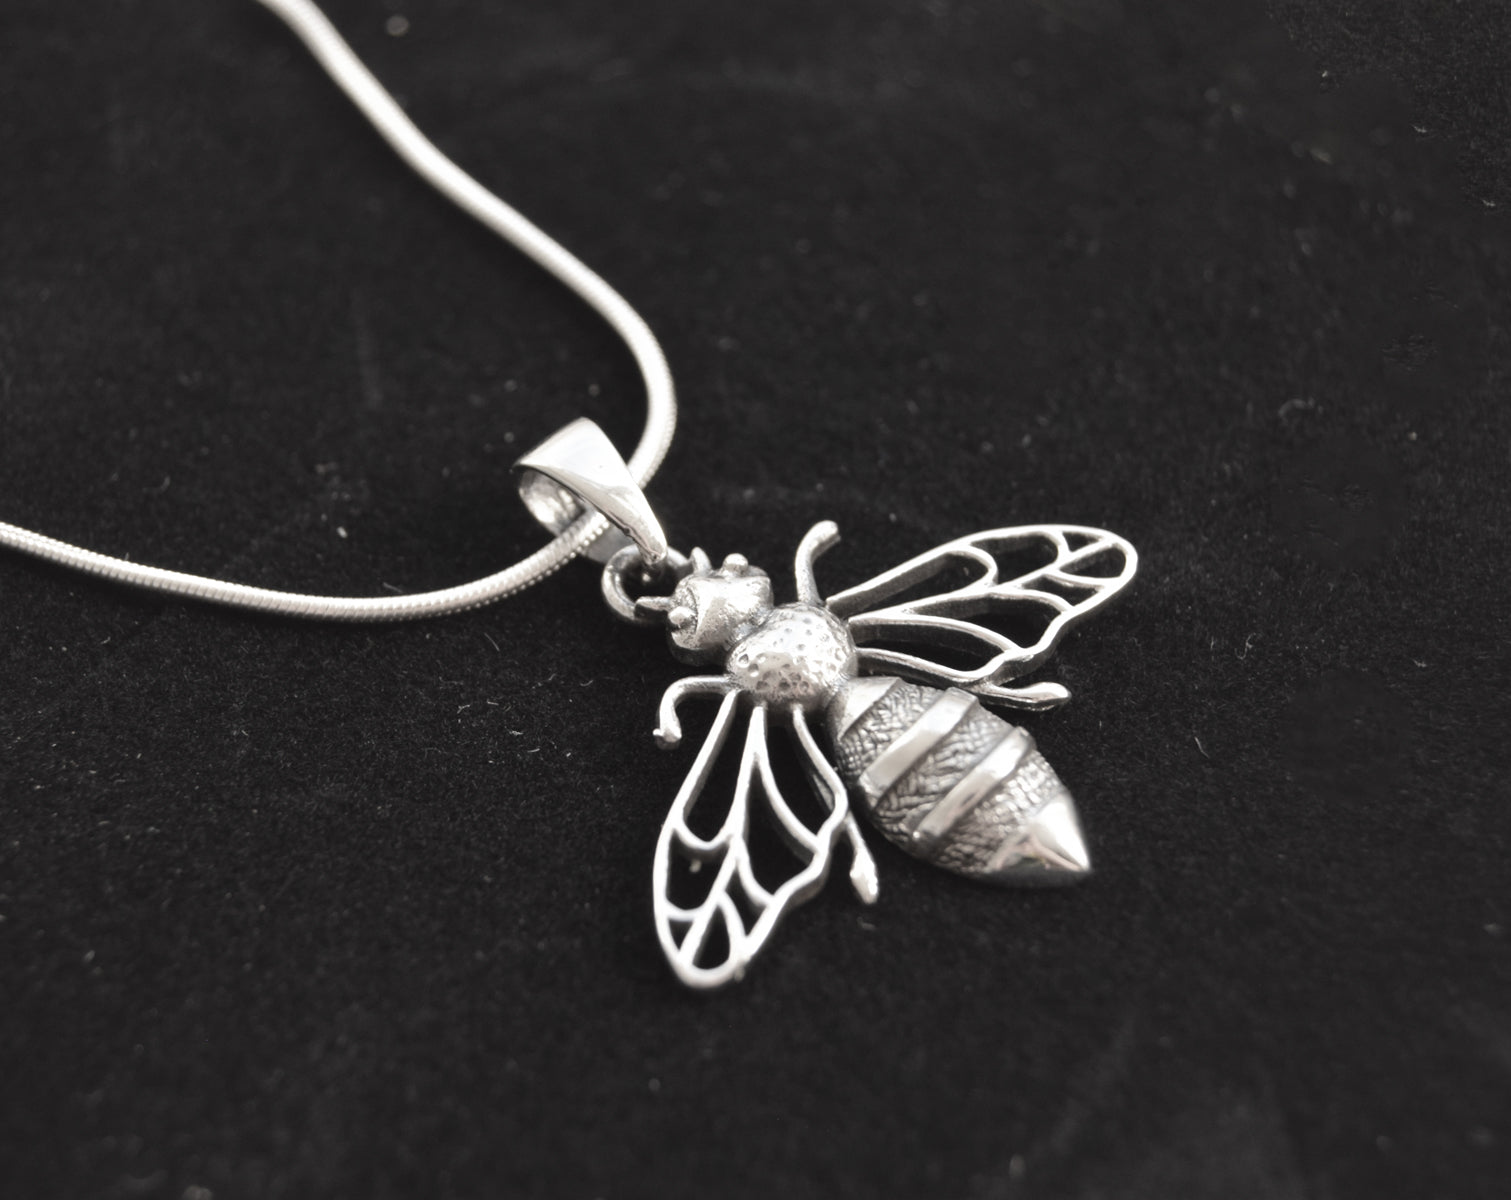 Large Silver Bee Necklace | The Manchester Shop